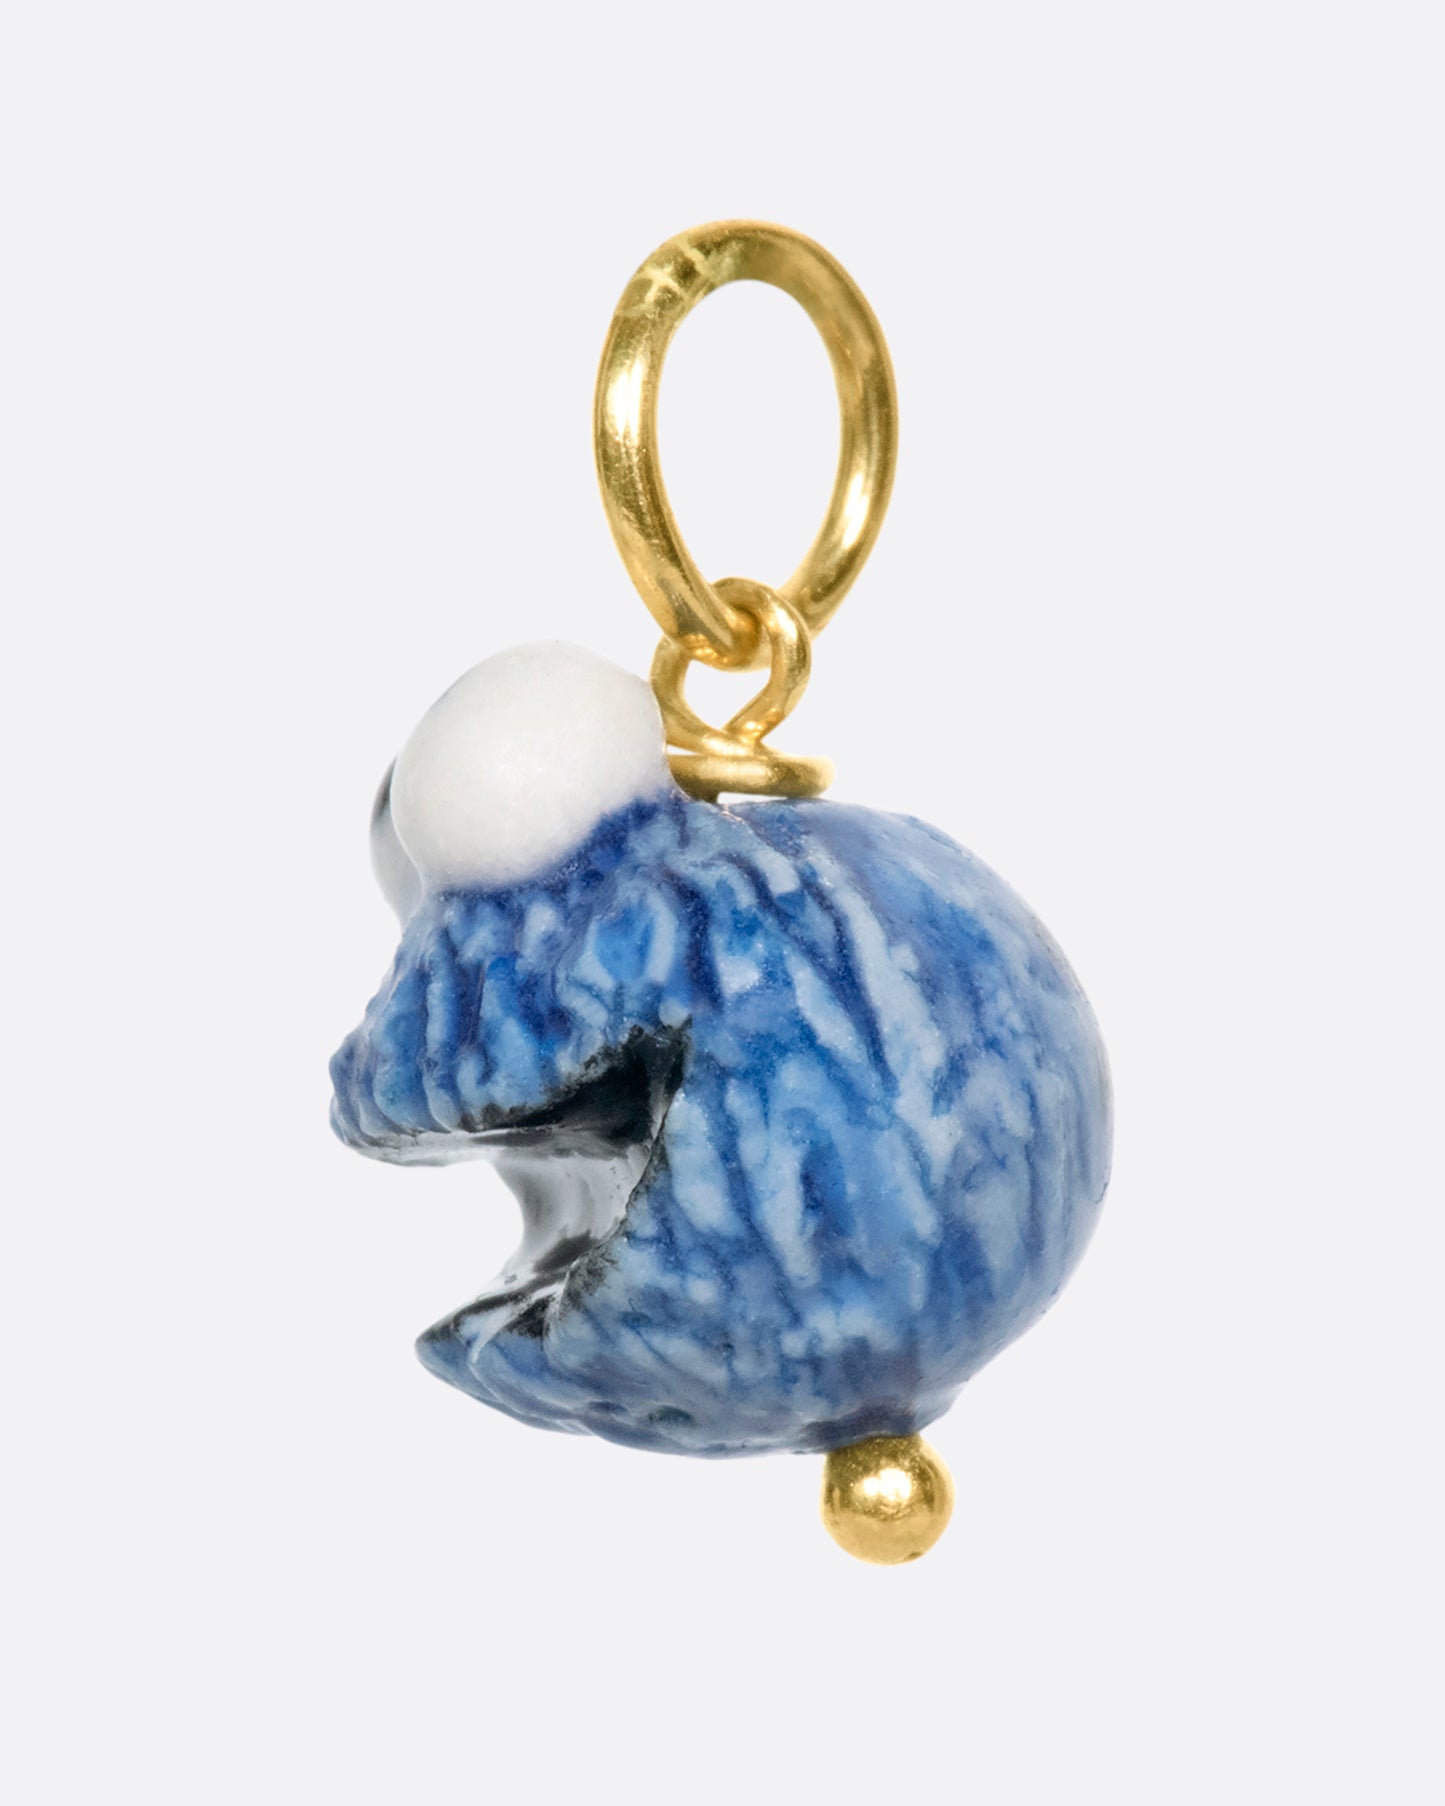 A porcelain Cookie Monster charm on a yellow gold bail.